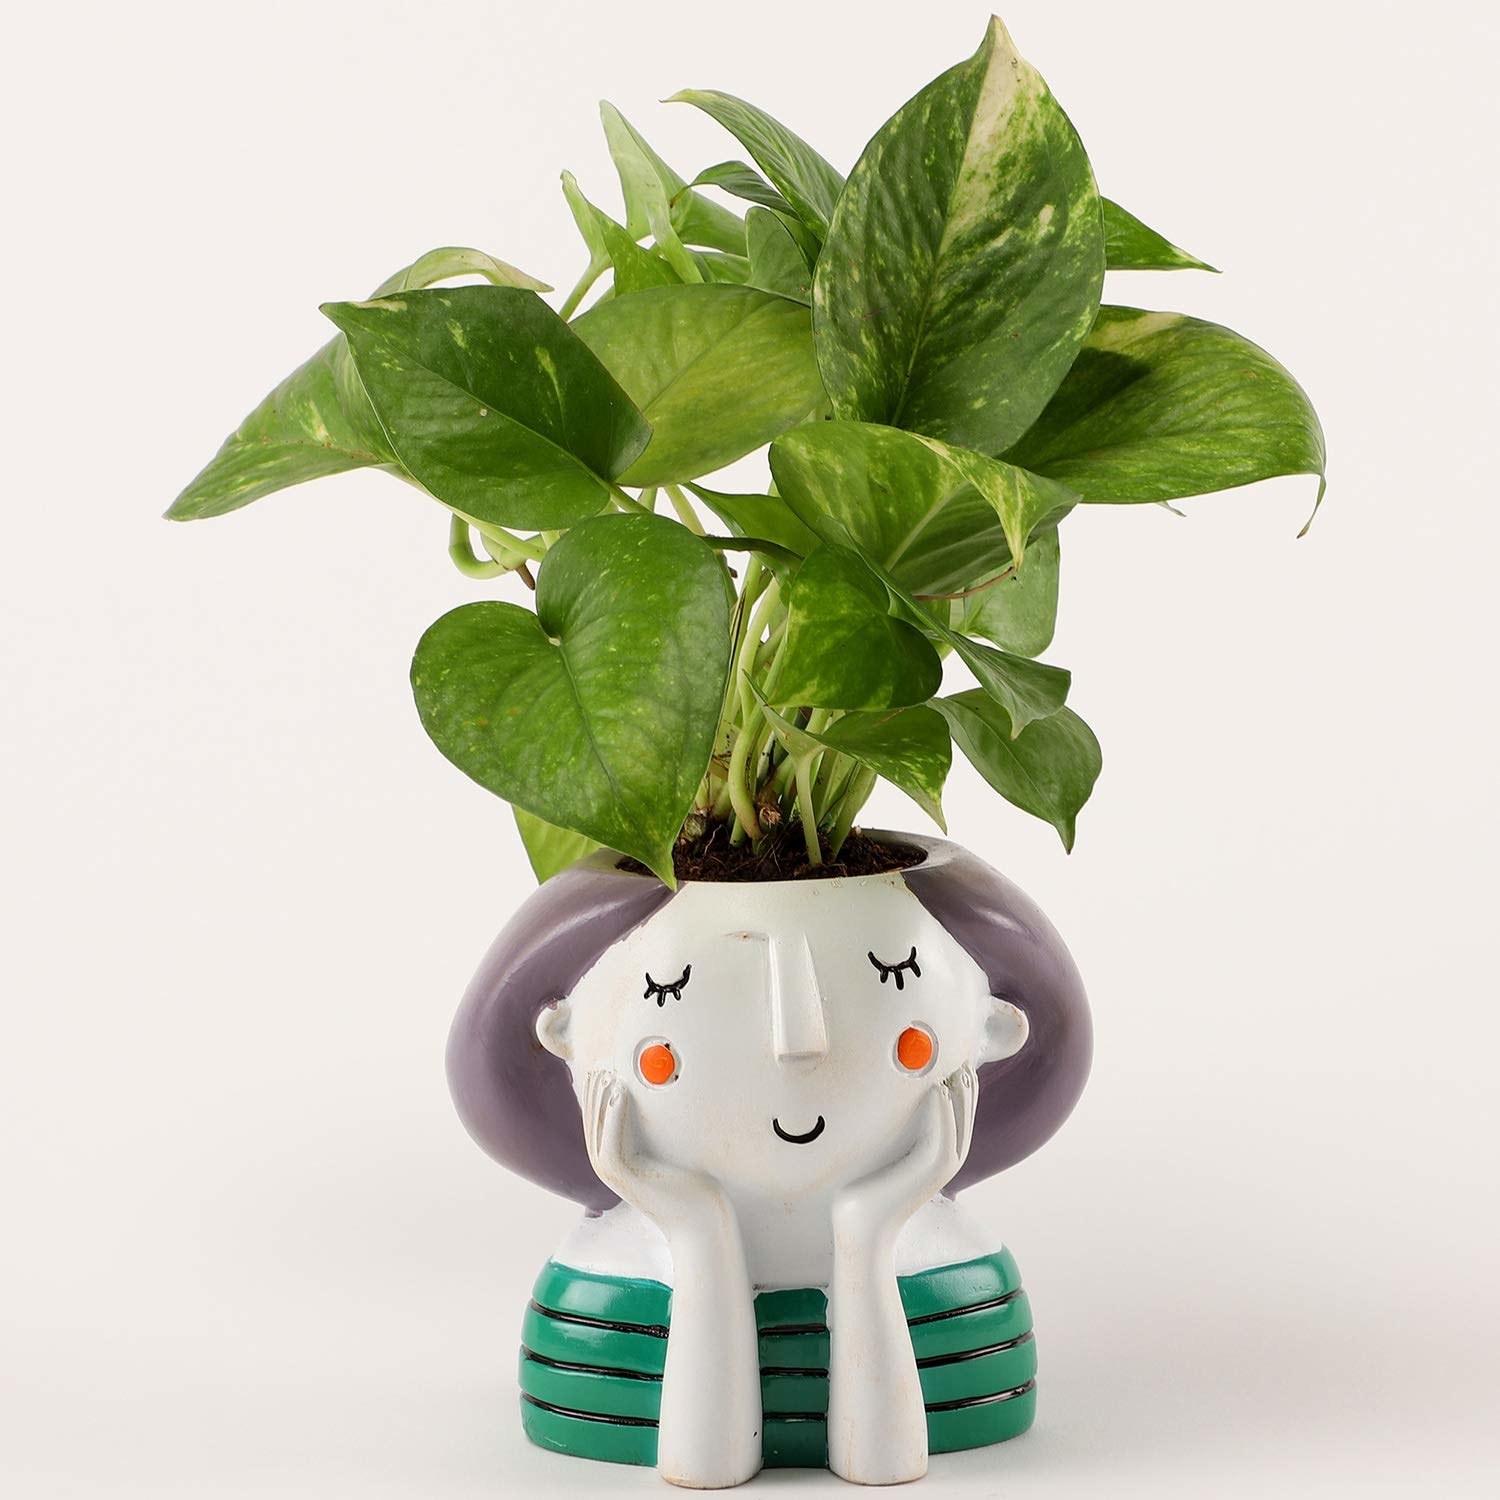 The plant kept in a pot designed to look like a thinking girl